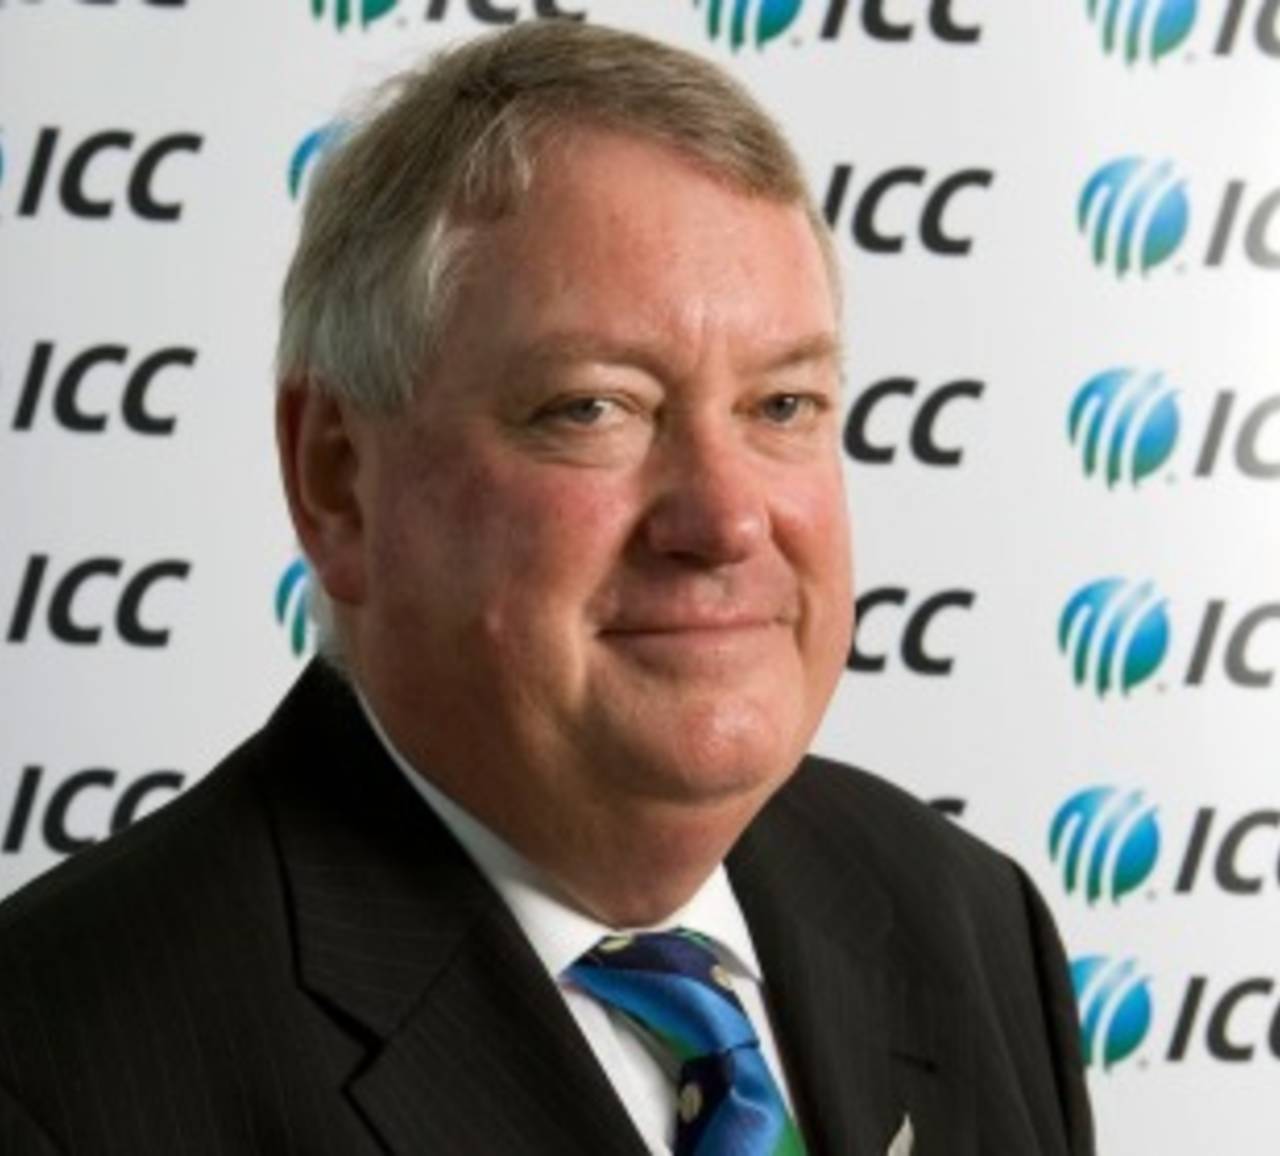 Chris Moller will not stand for re-election to the post of NZC chairman&nbsp;&nbsp;&bull;&nbsp;&nbsp;Getty Images